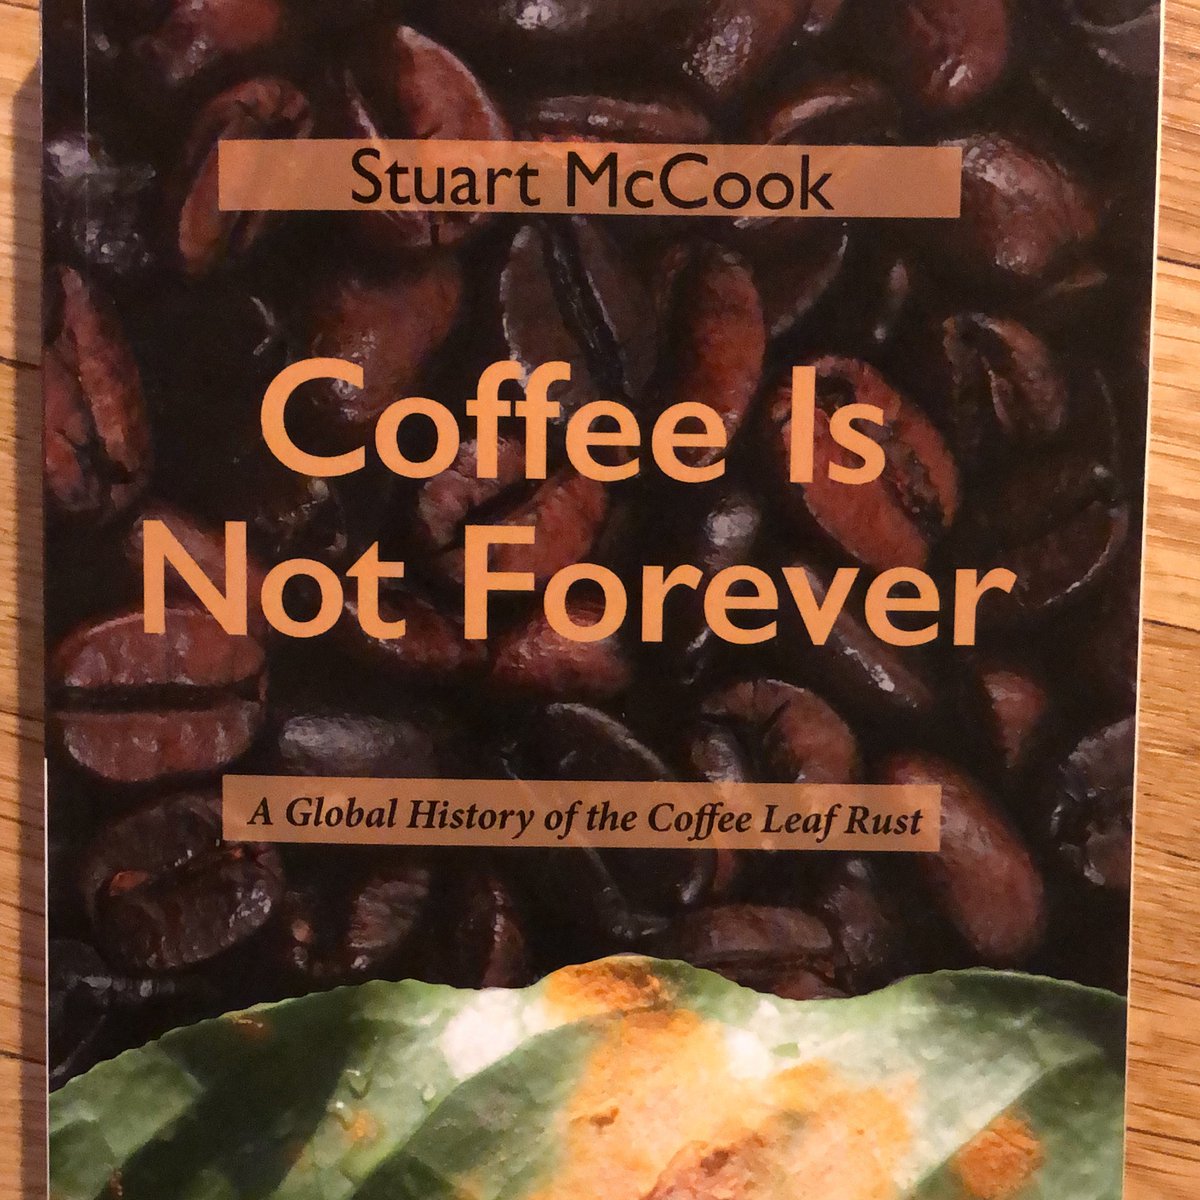 A fantastic history of how we've negotiated living with rust is  @stuartmccook's new book, Coffee Is Not Forever. Add it to your  #quarantinereading list for tremendous insight into how rust has shaped coffee production as we know it.  #wcrreads  https://www.ohioswallow.com/book/Coffee+Is+Not+Forever